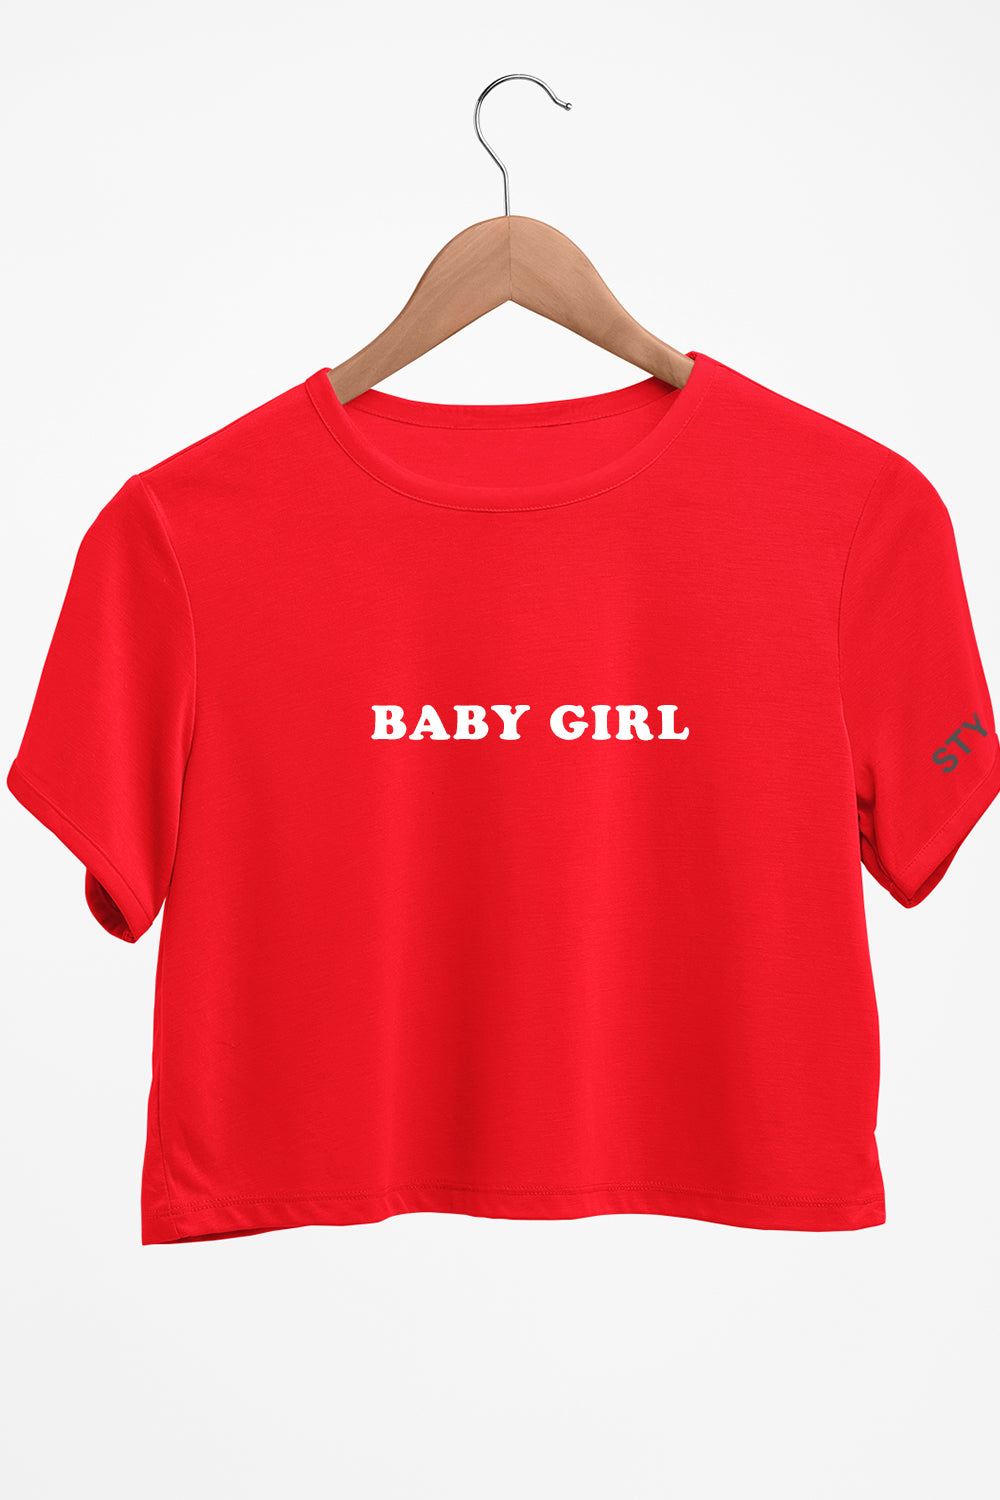 Baby Girl Graphic Printed Red Crop Top